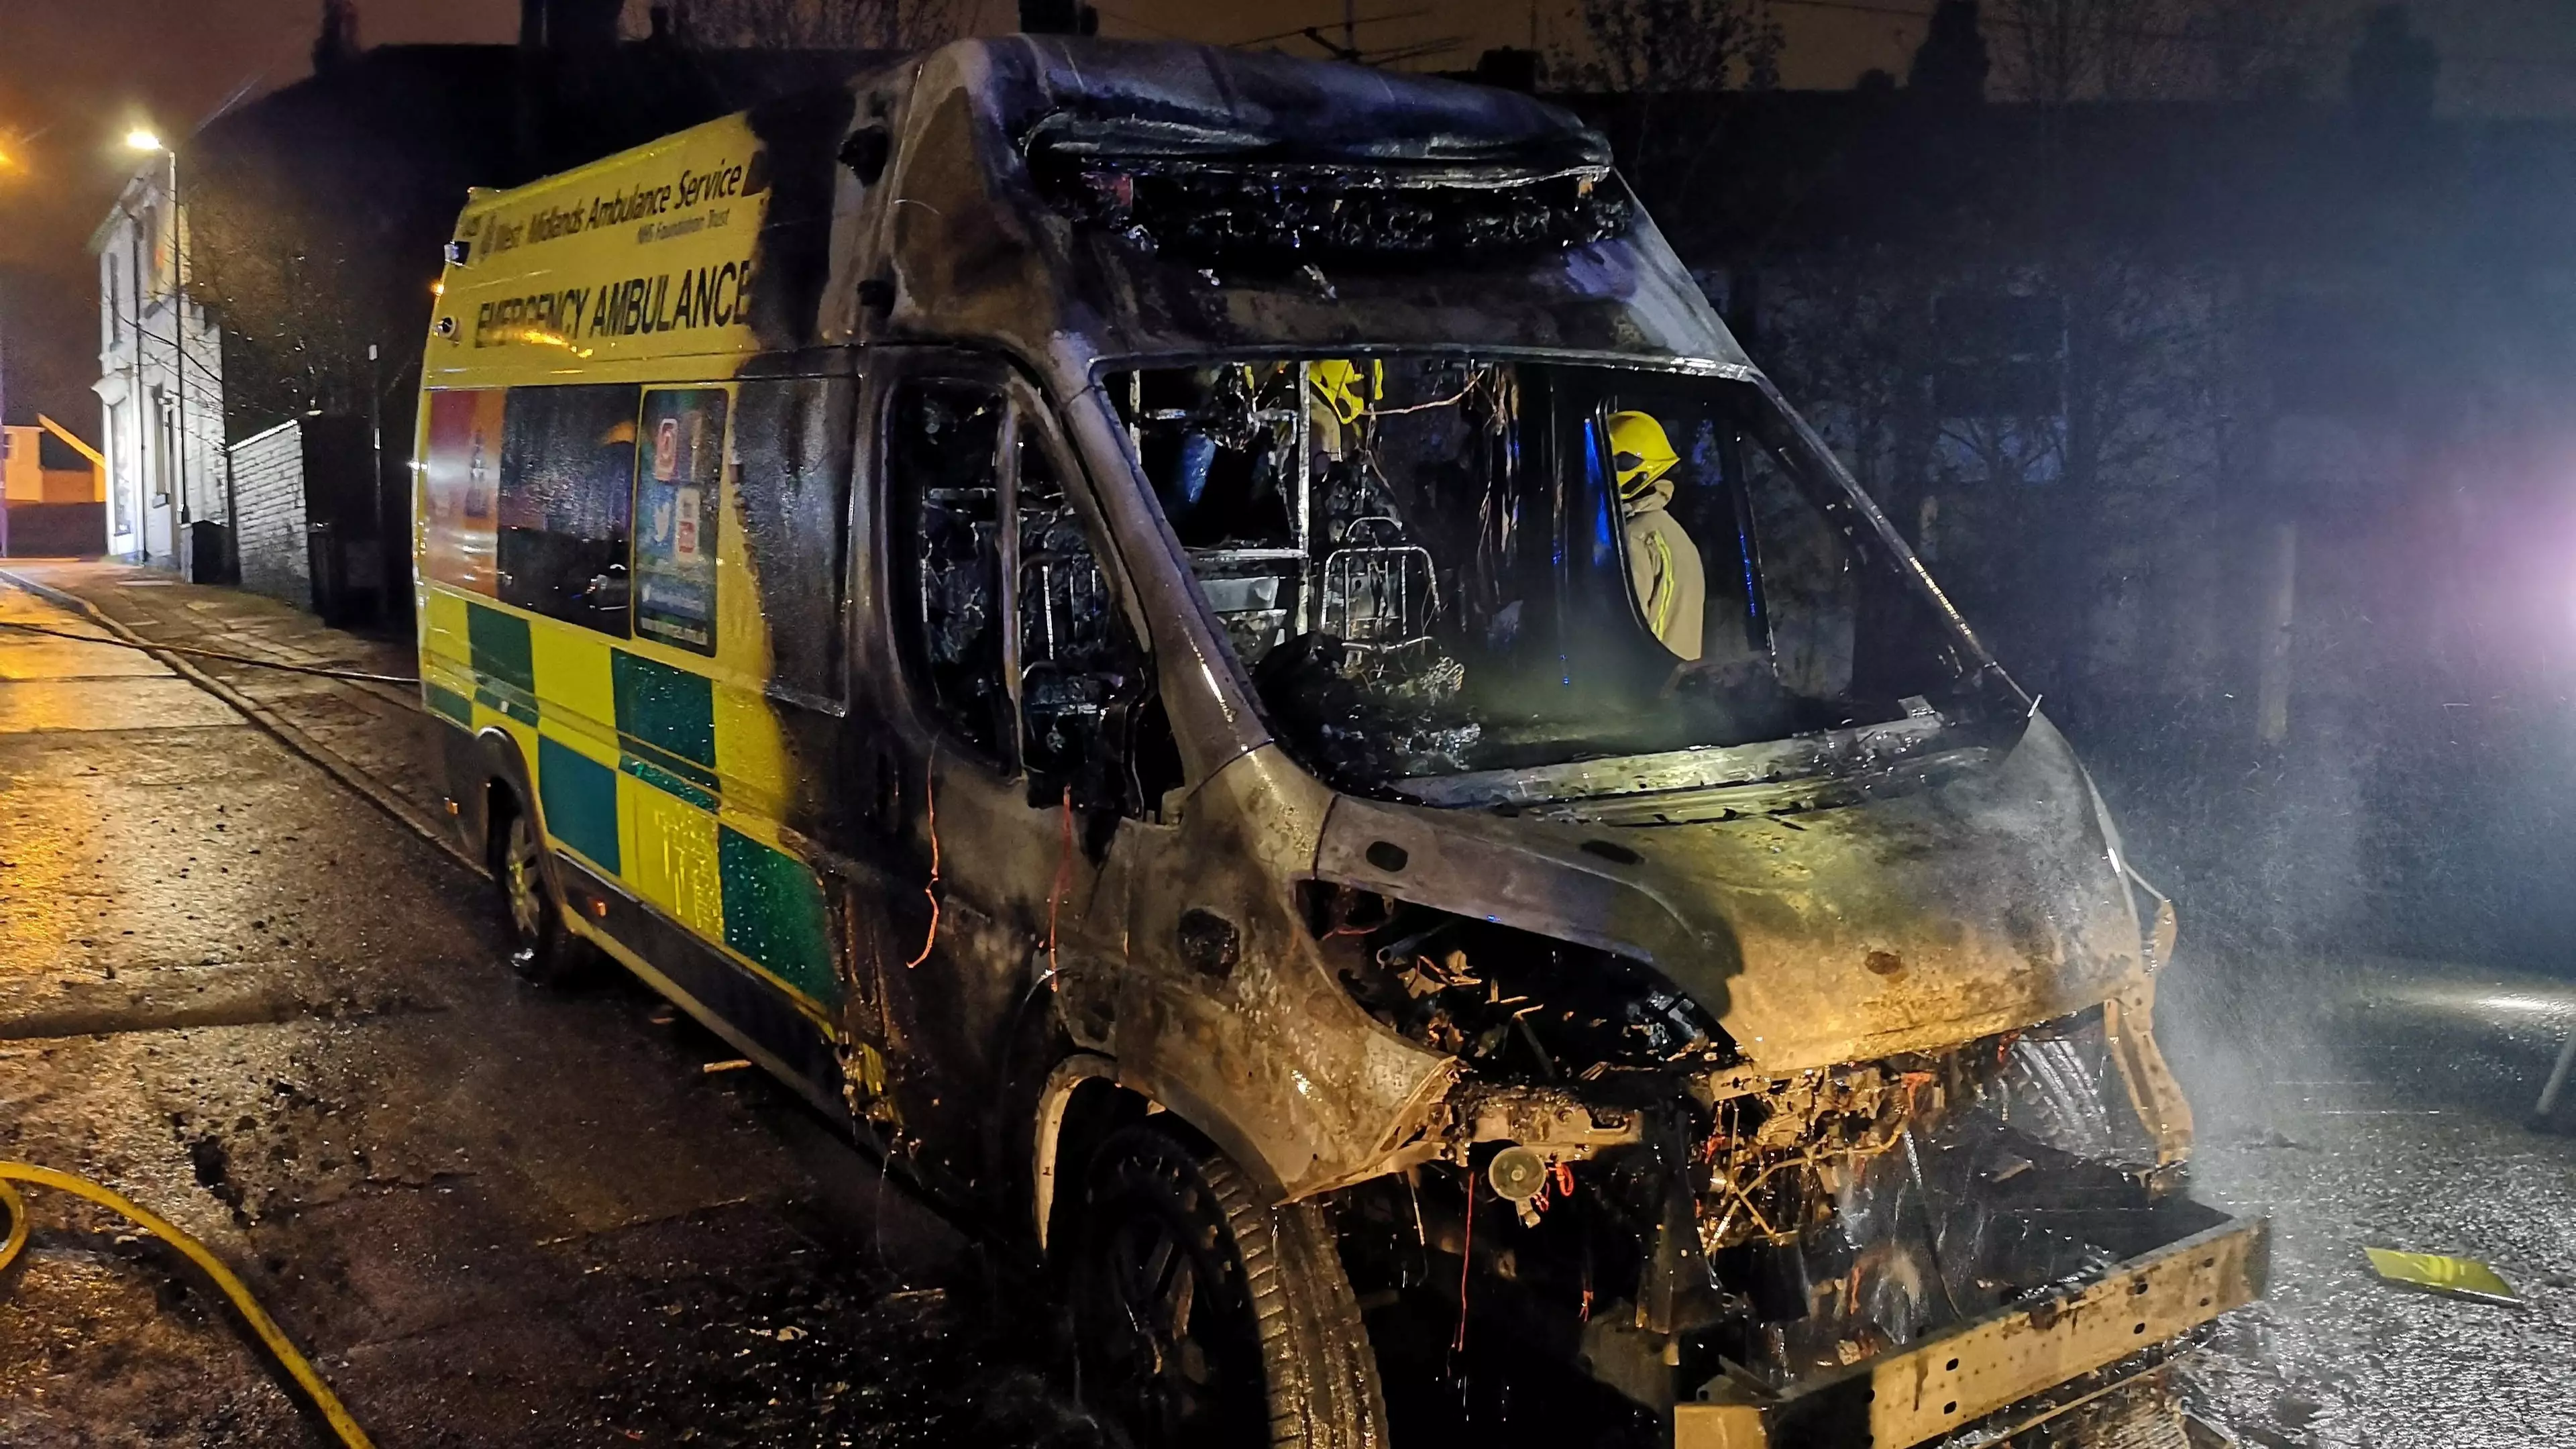 Ambulance Destroyed By Fire As Paramedics Treated Patient In Nearby House 